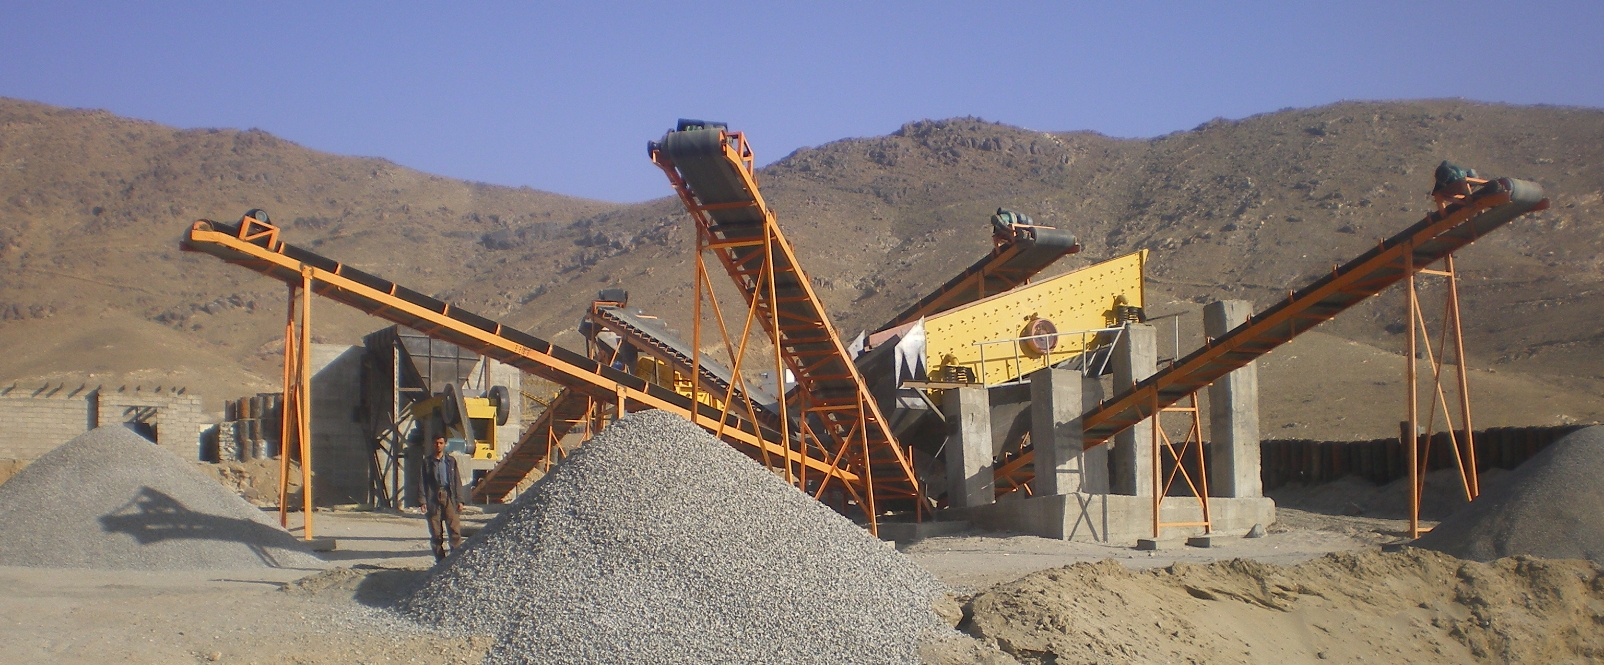 stationary type gravel crushing plant for sale